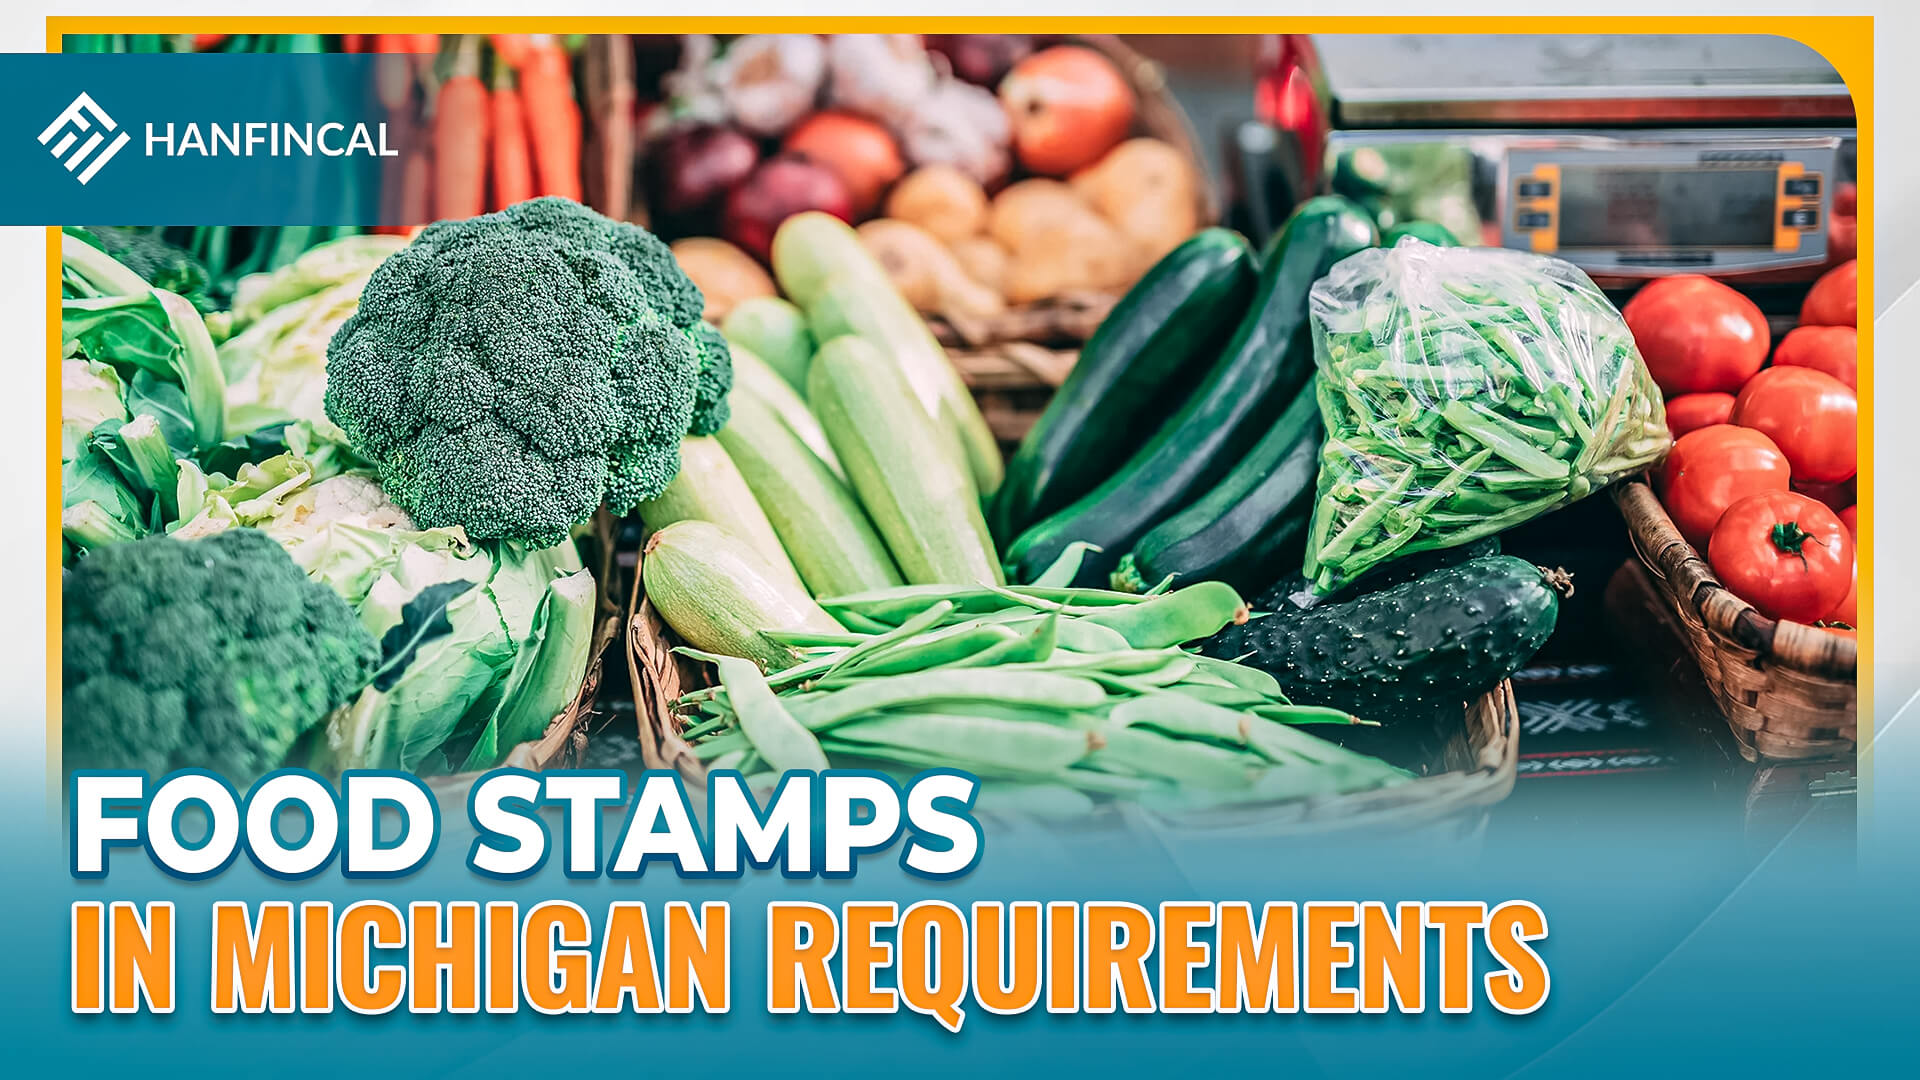 How To Apply For Food Stamps In Michigan?